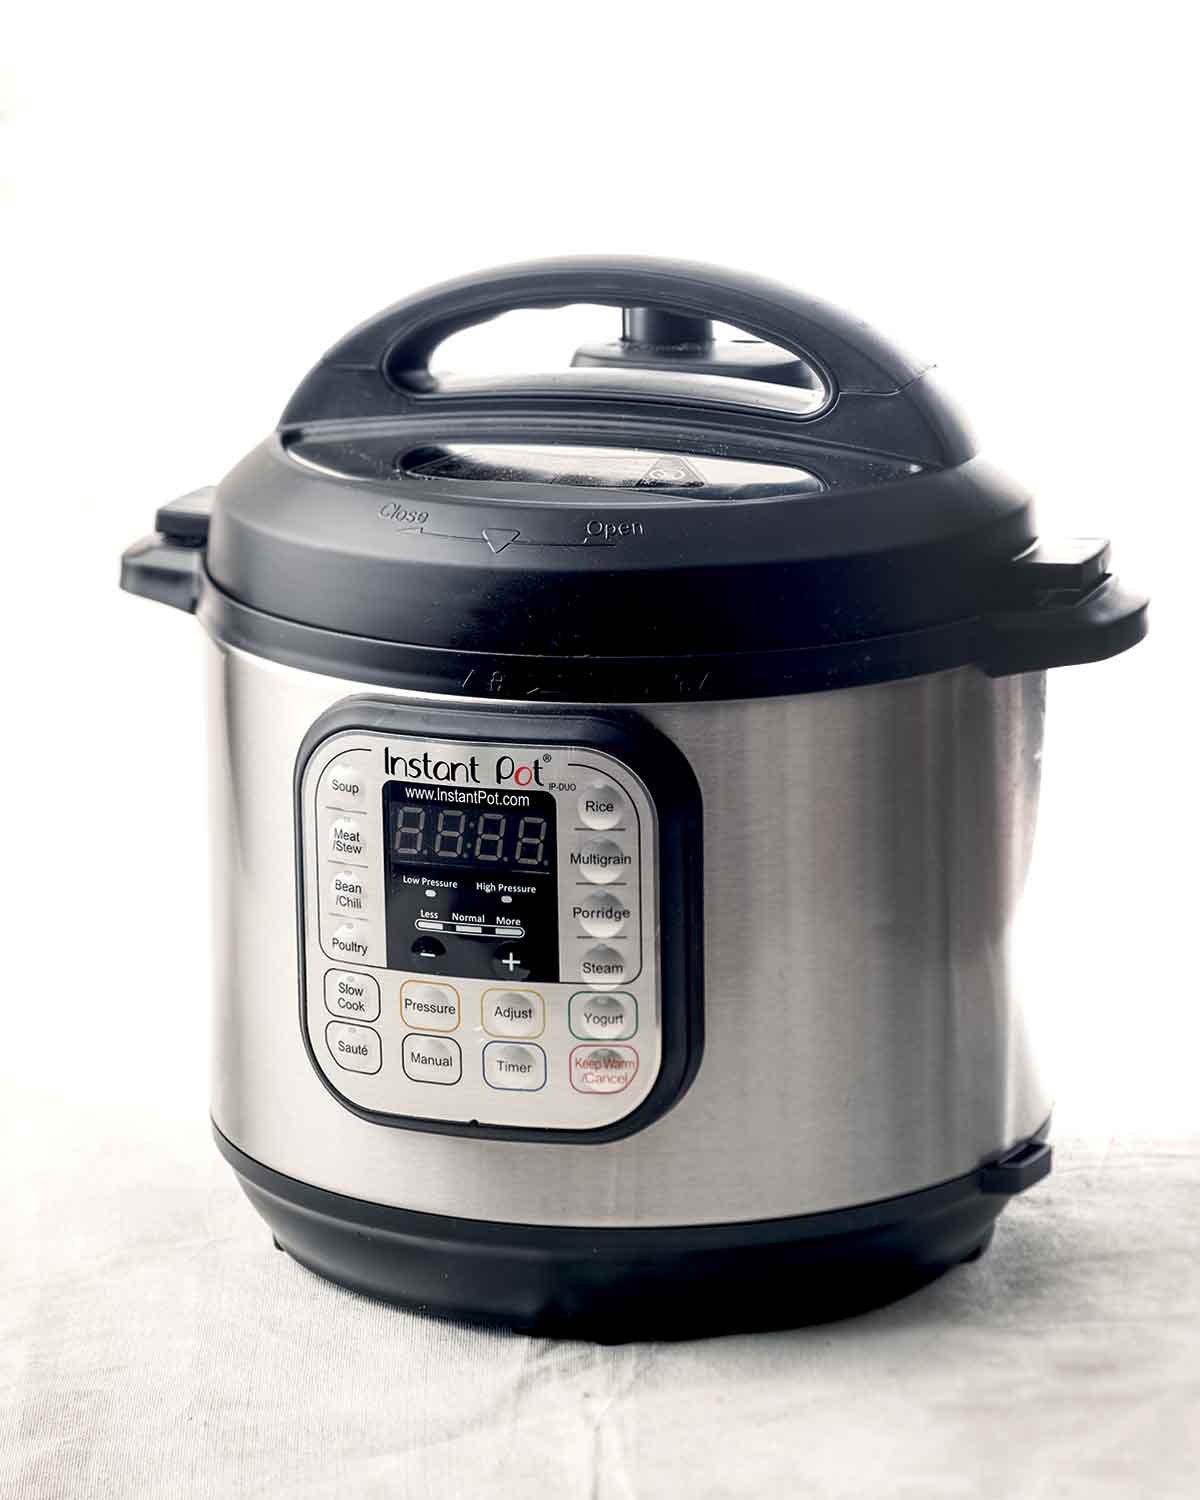 An Instant Pot, as illustration of how to use your instant pot.